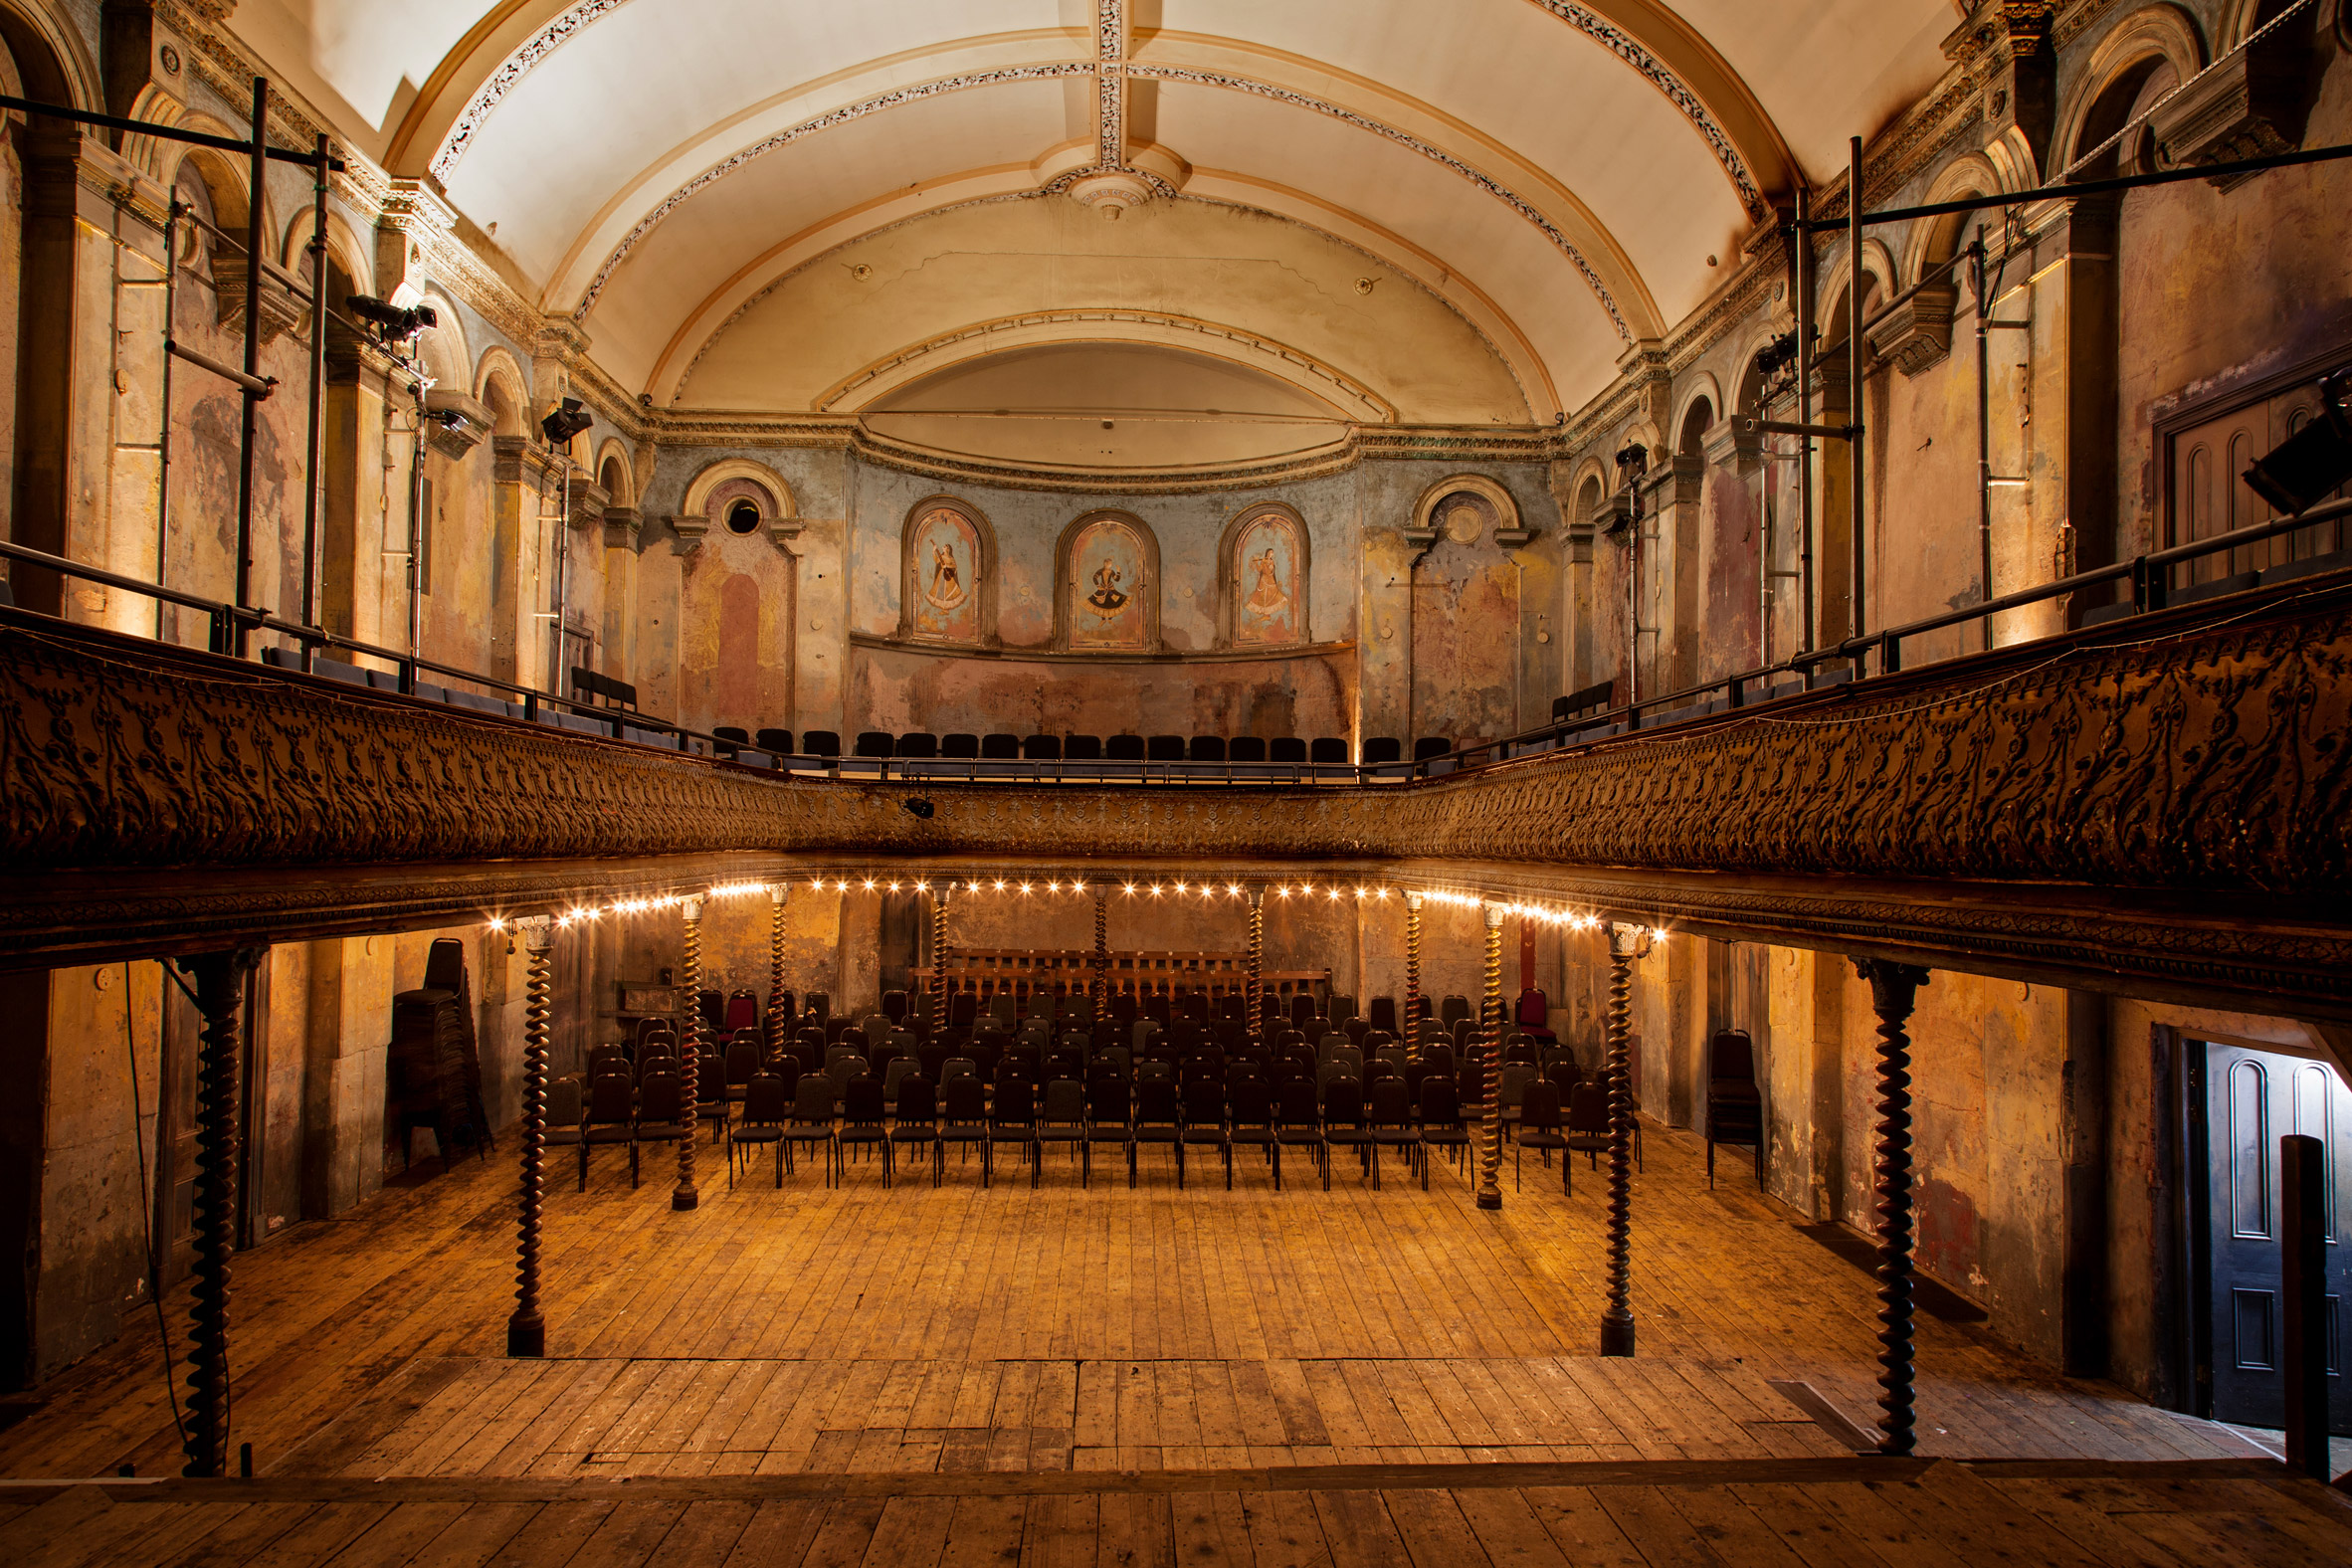 London’s Great Theatres book by Simon Callow and Derry Moore for Prestel